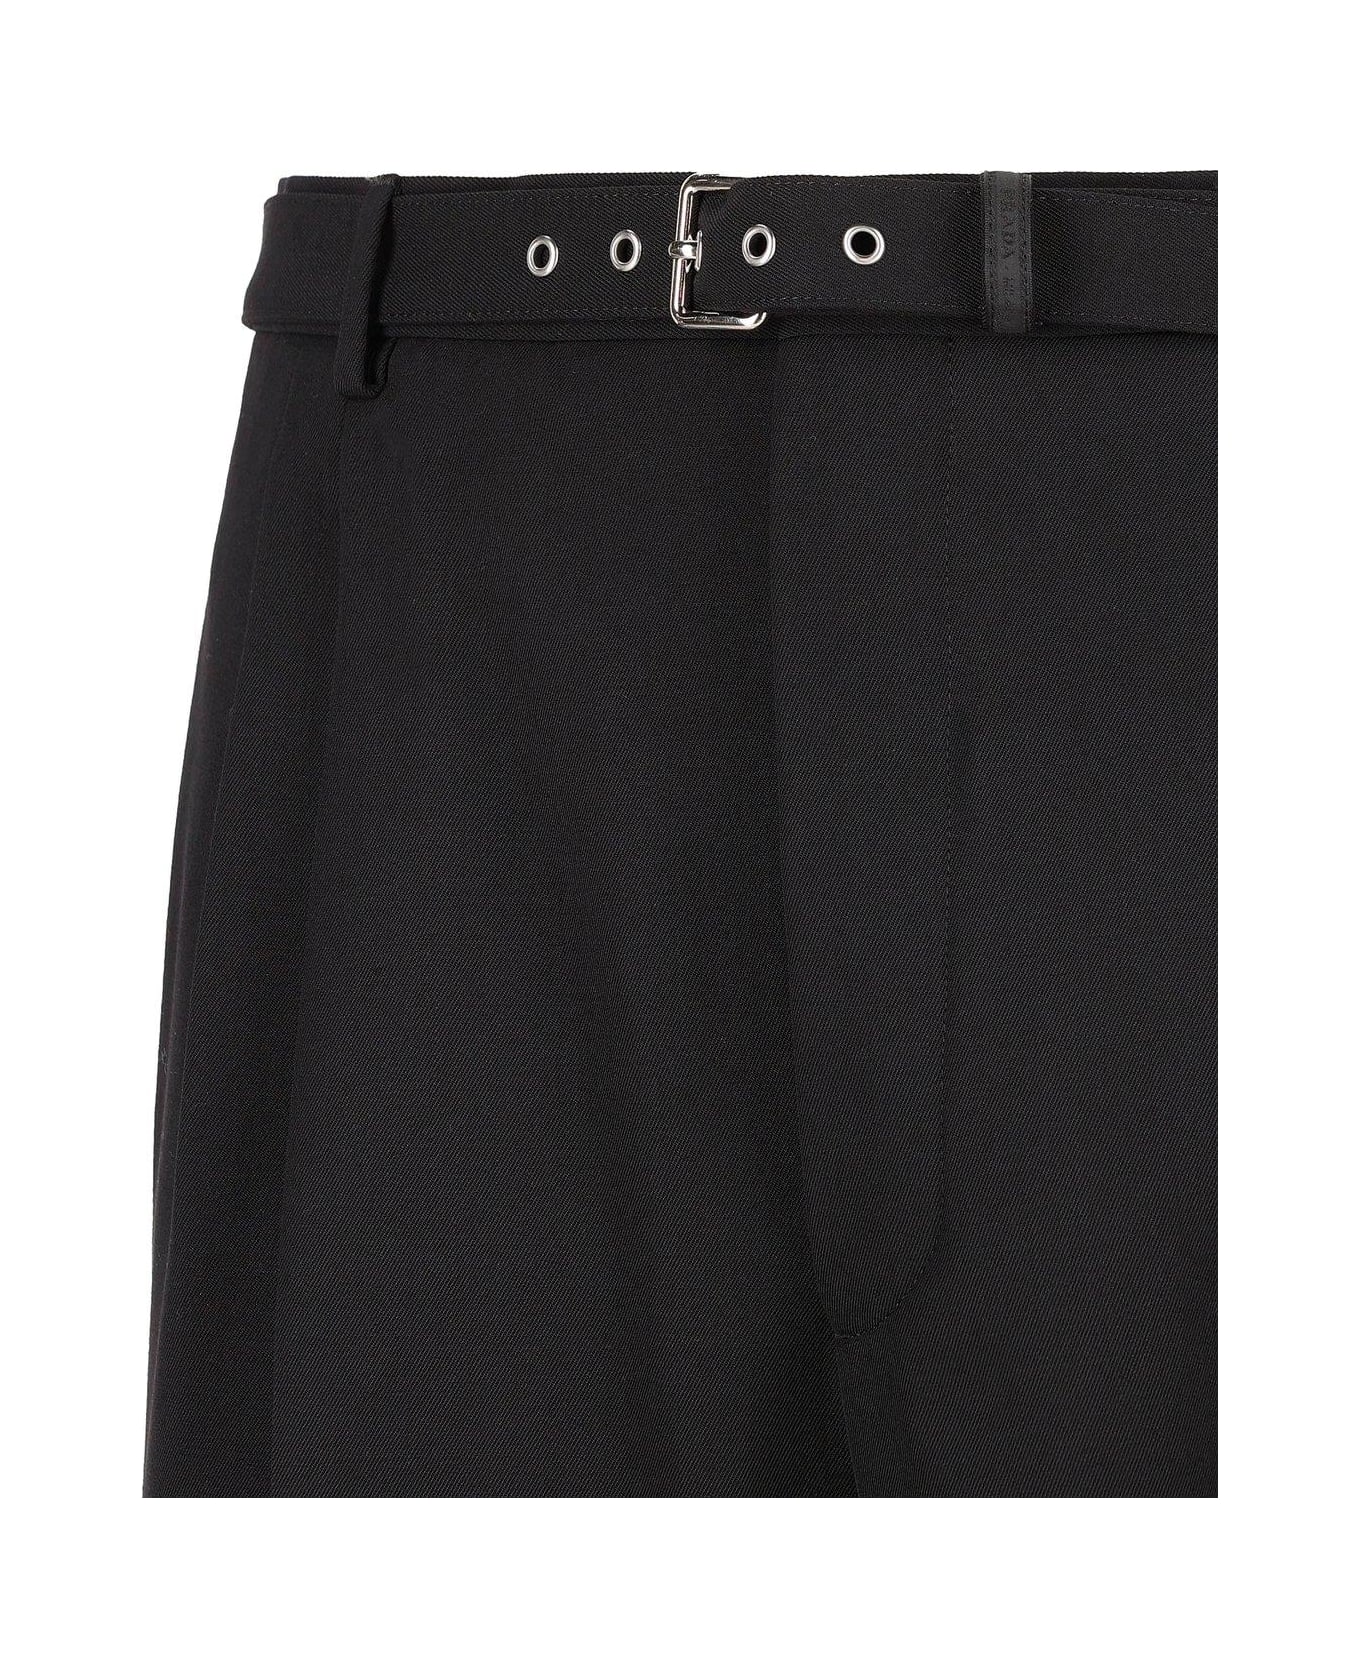 Prada Belted Tailored Trousers - Black